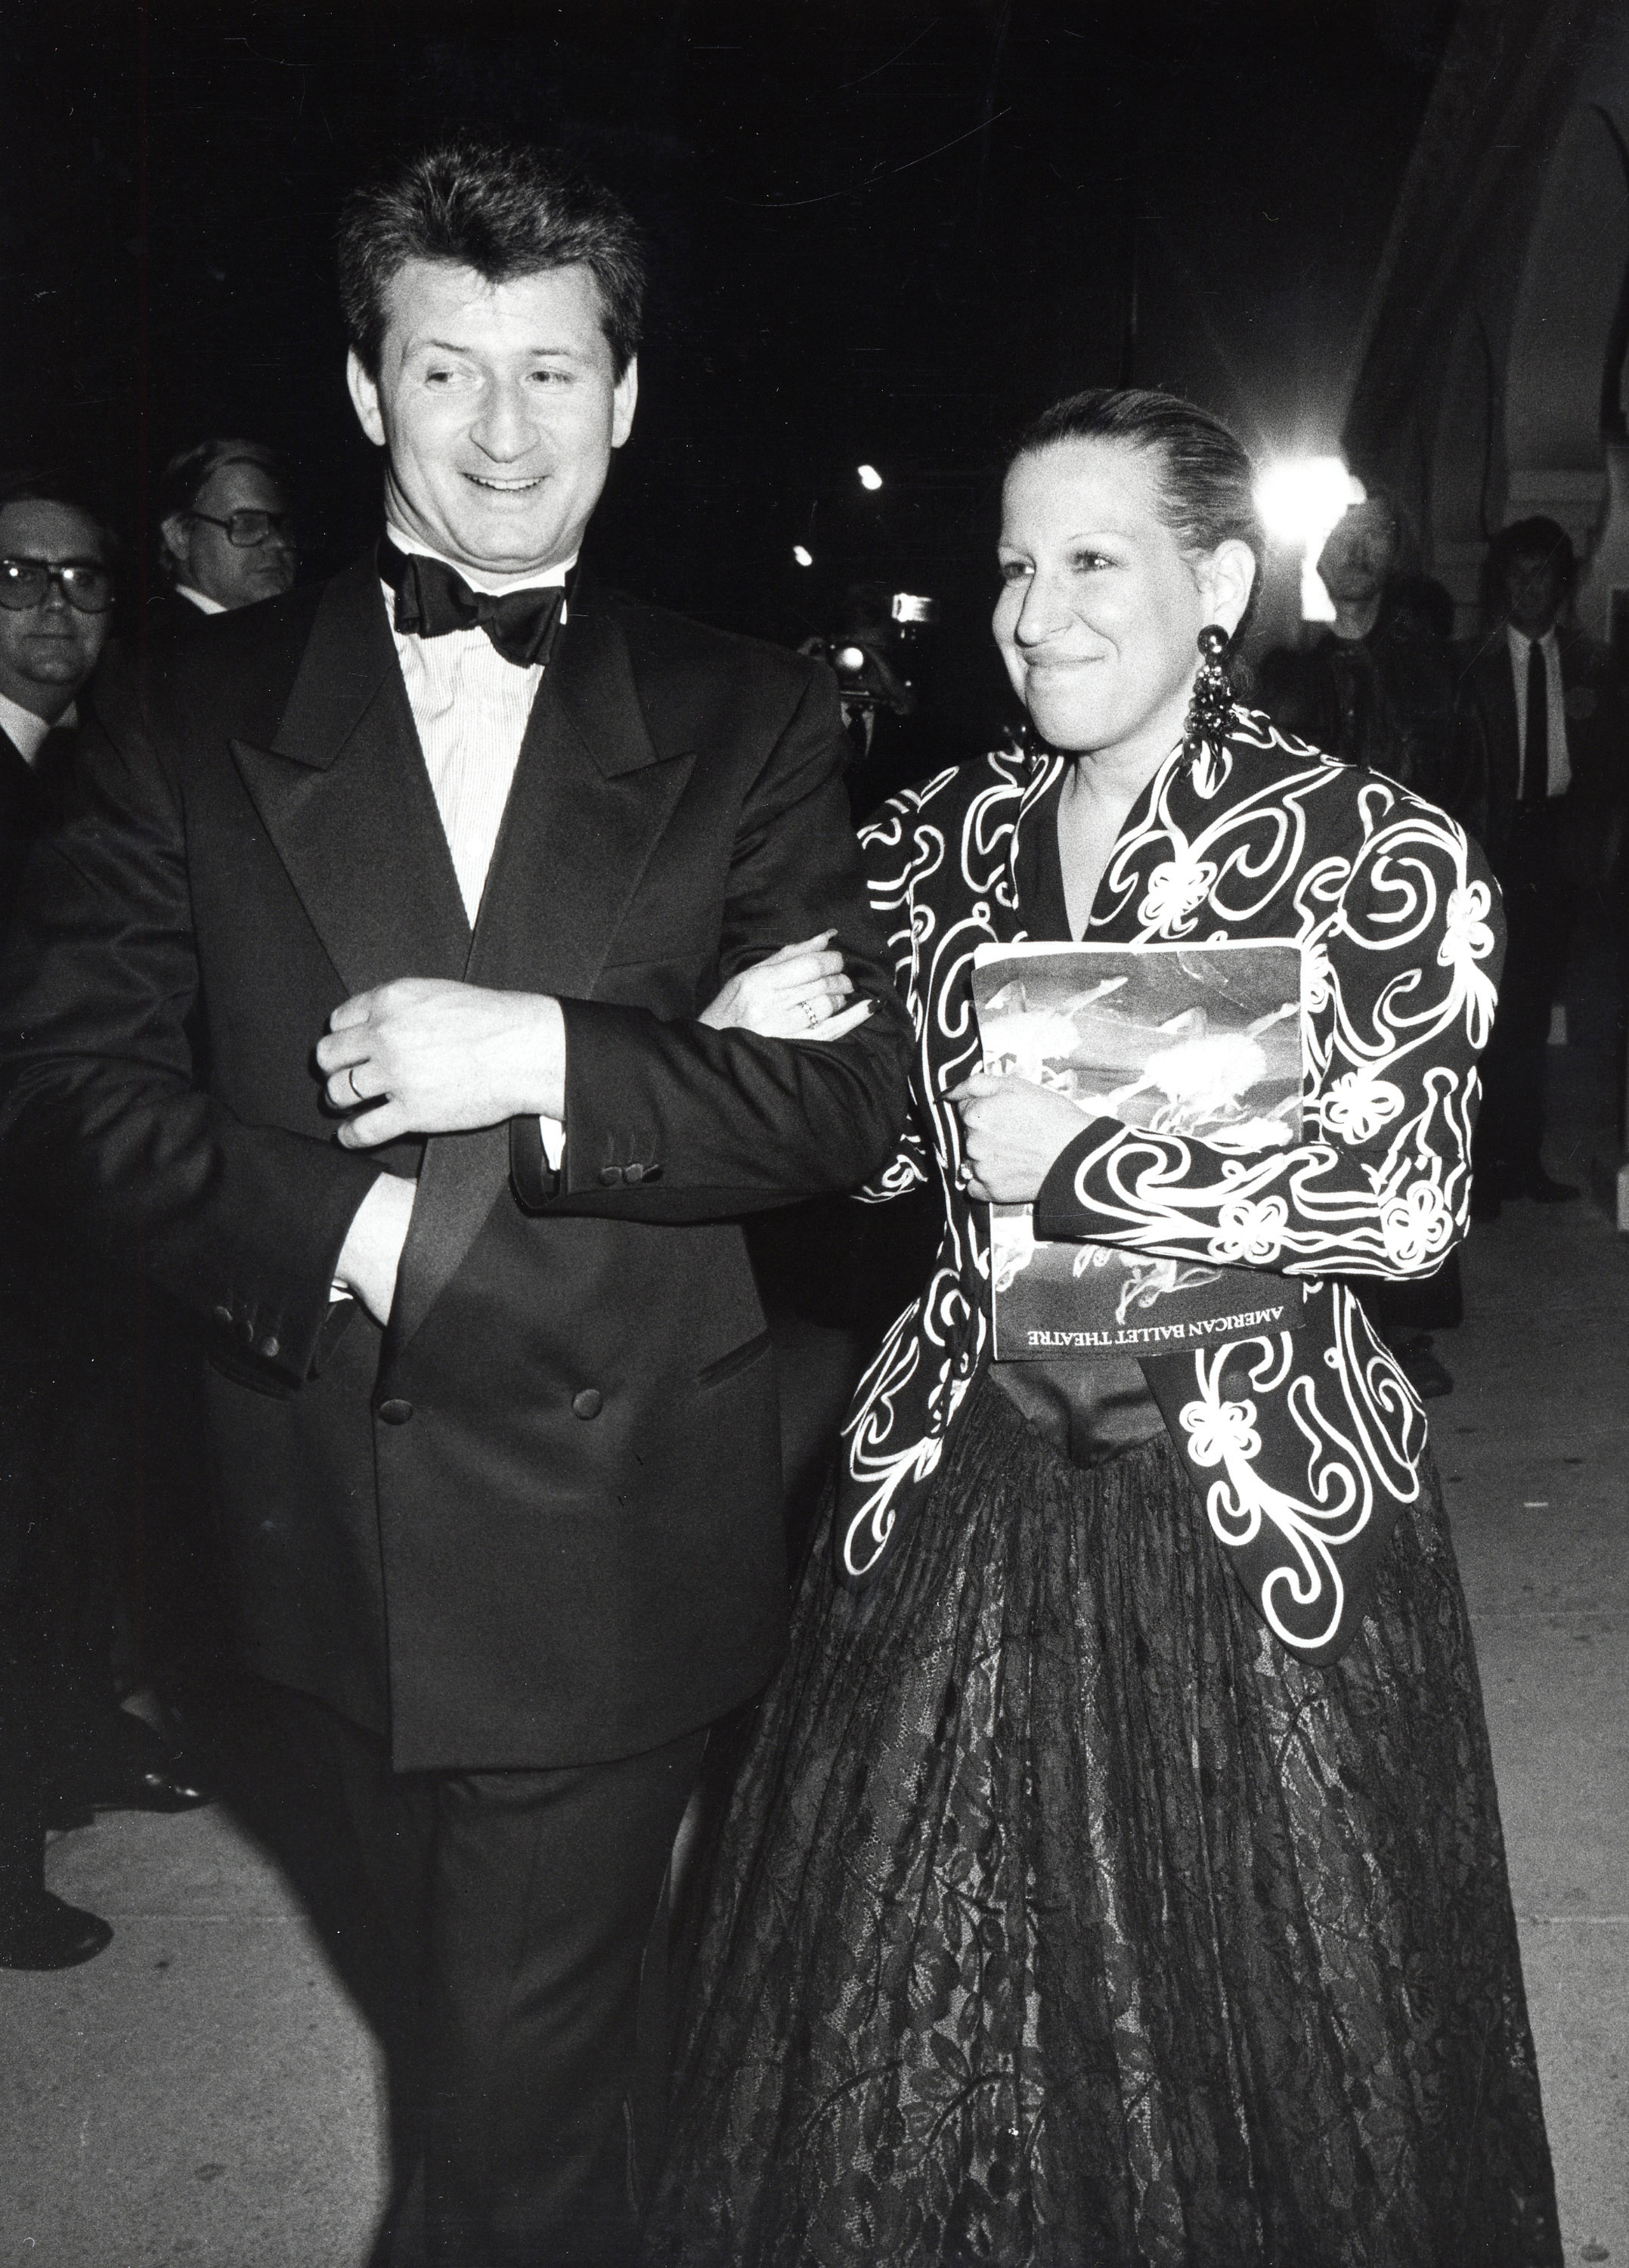 Martin von Haselberg and Bette Midler at Bette Midler's American Ballet Theater opening performance, March 24, 1986 | Source: Getty Images